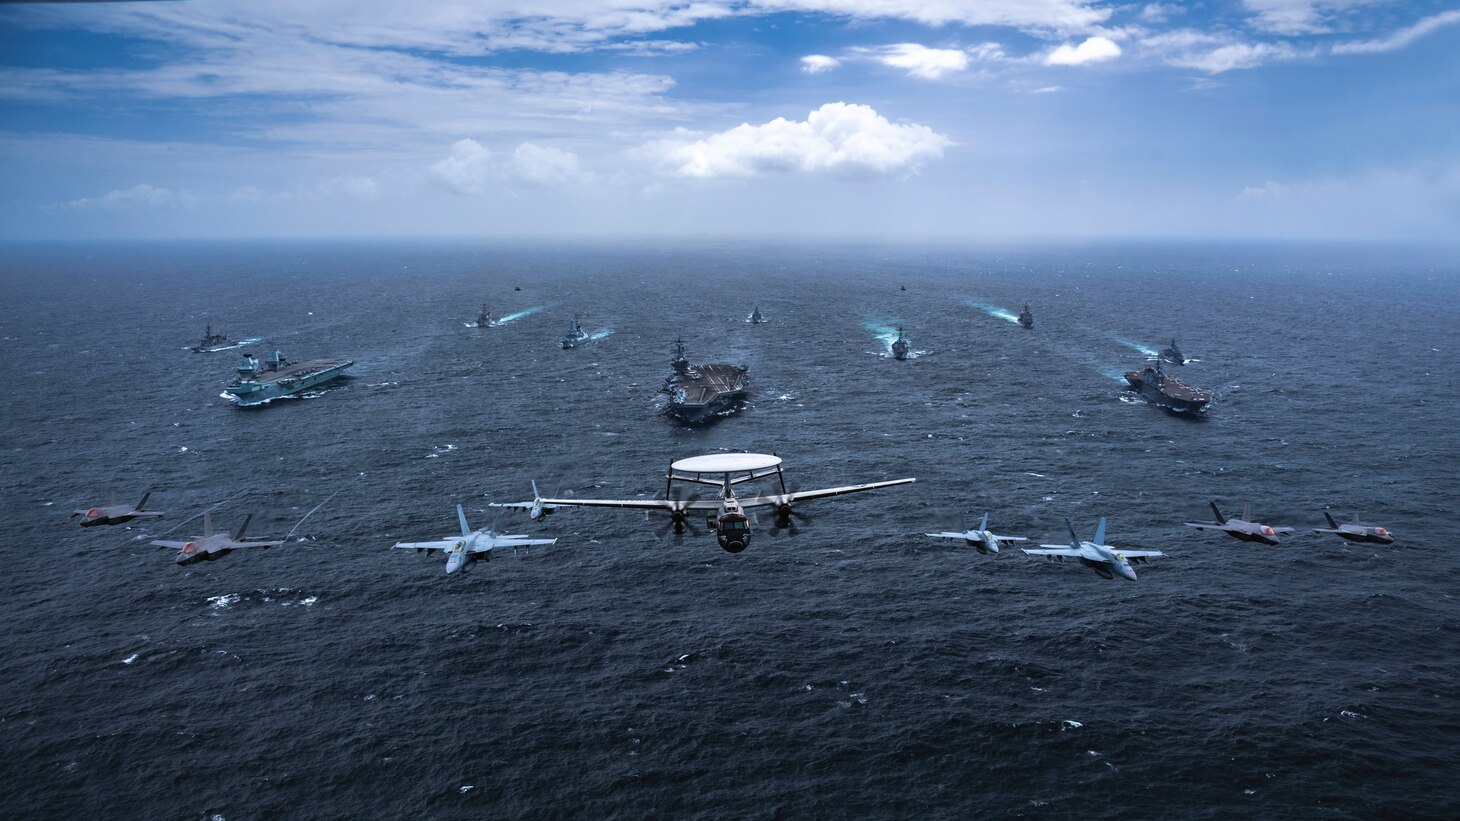 BAY OF BENGAL (Oct. 17, 2021) Ships and aircraft from the U.S. Navy, Royal Australian Navy, Japan Maritime Self-Defense Force, and U.K. Royal Navy transit in formation as part of Maritime Partnership Exercise (MPX) 2021, Oct. 17, 2021. MPX 2021 is a multilateral maritime exercise between the Royal Australian Navy, Japan Maritime Self-Defense Force, U.K. Royal Navy, and U.S. maritime forces, focused on naval cooperation, interoperability and regional security and stability in the Indo-Pacific and is an example of the enduring partnership between Australian, Japanese, U.K. and U.S. maritime forces, who routinely operate together in the Indo-Pacific, fostering a cooperative approach toward regional security and stability. (U.S. Navy photo by Mass Communication Specialist 2nd Class Haydn N. Smith)